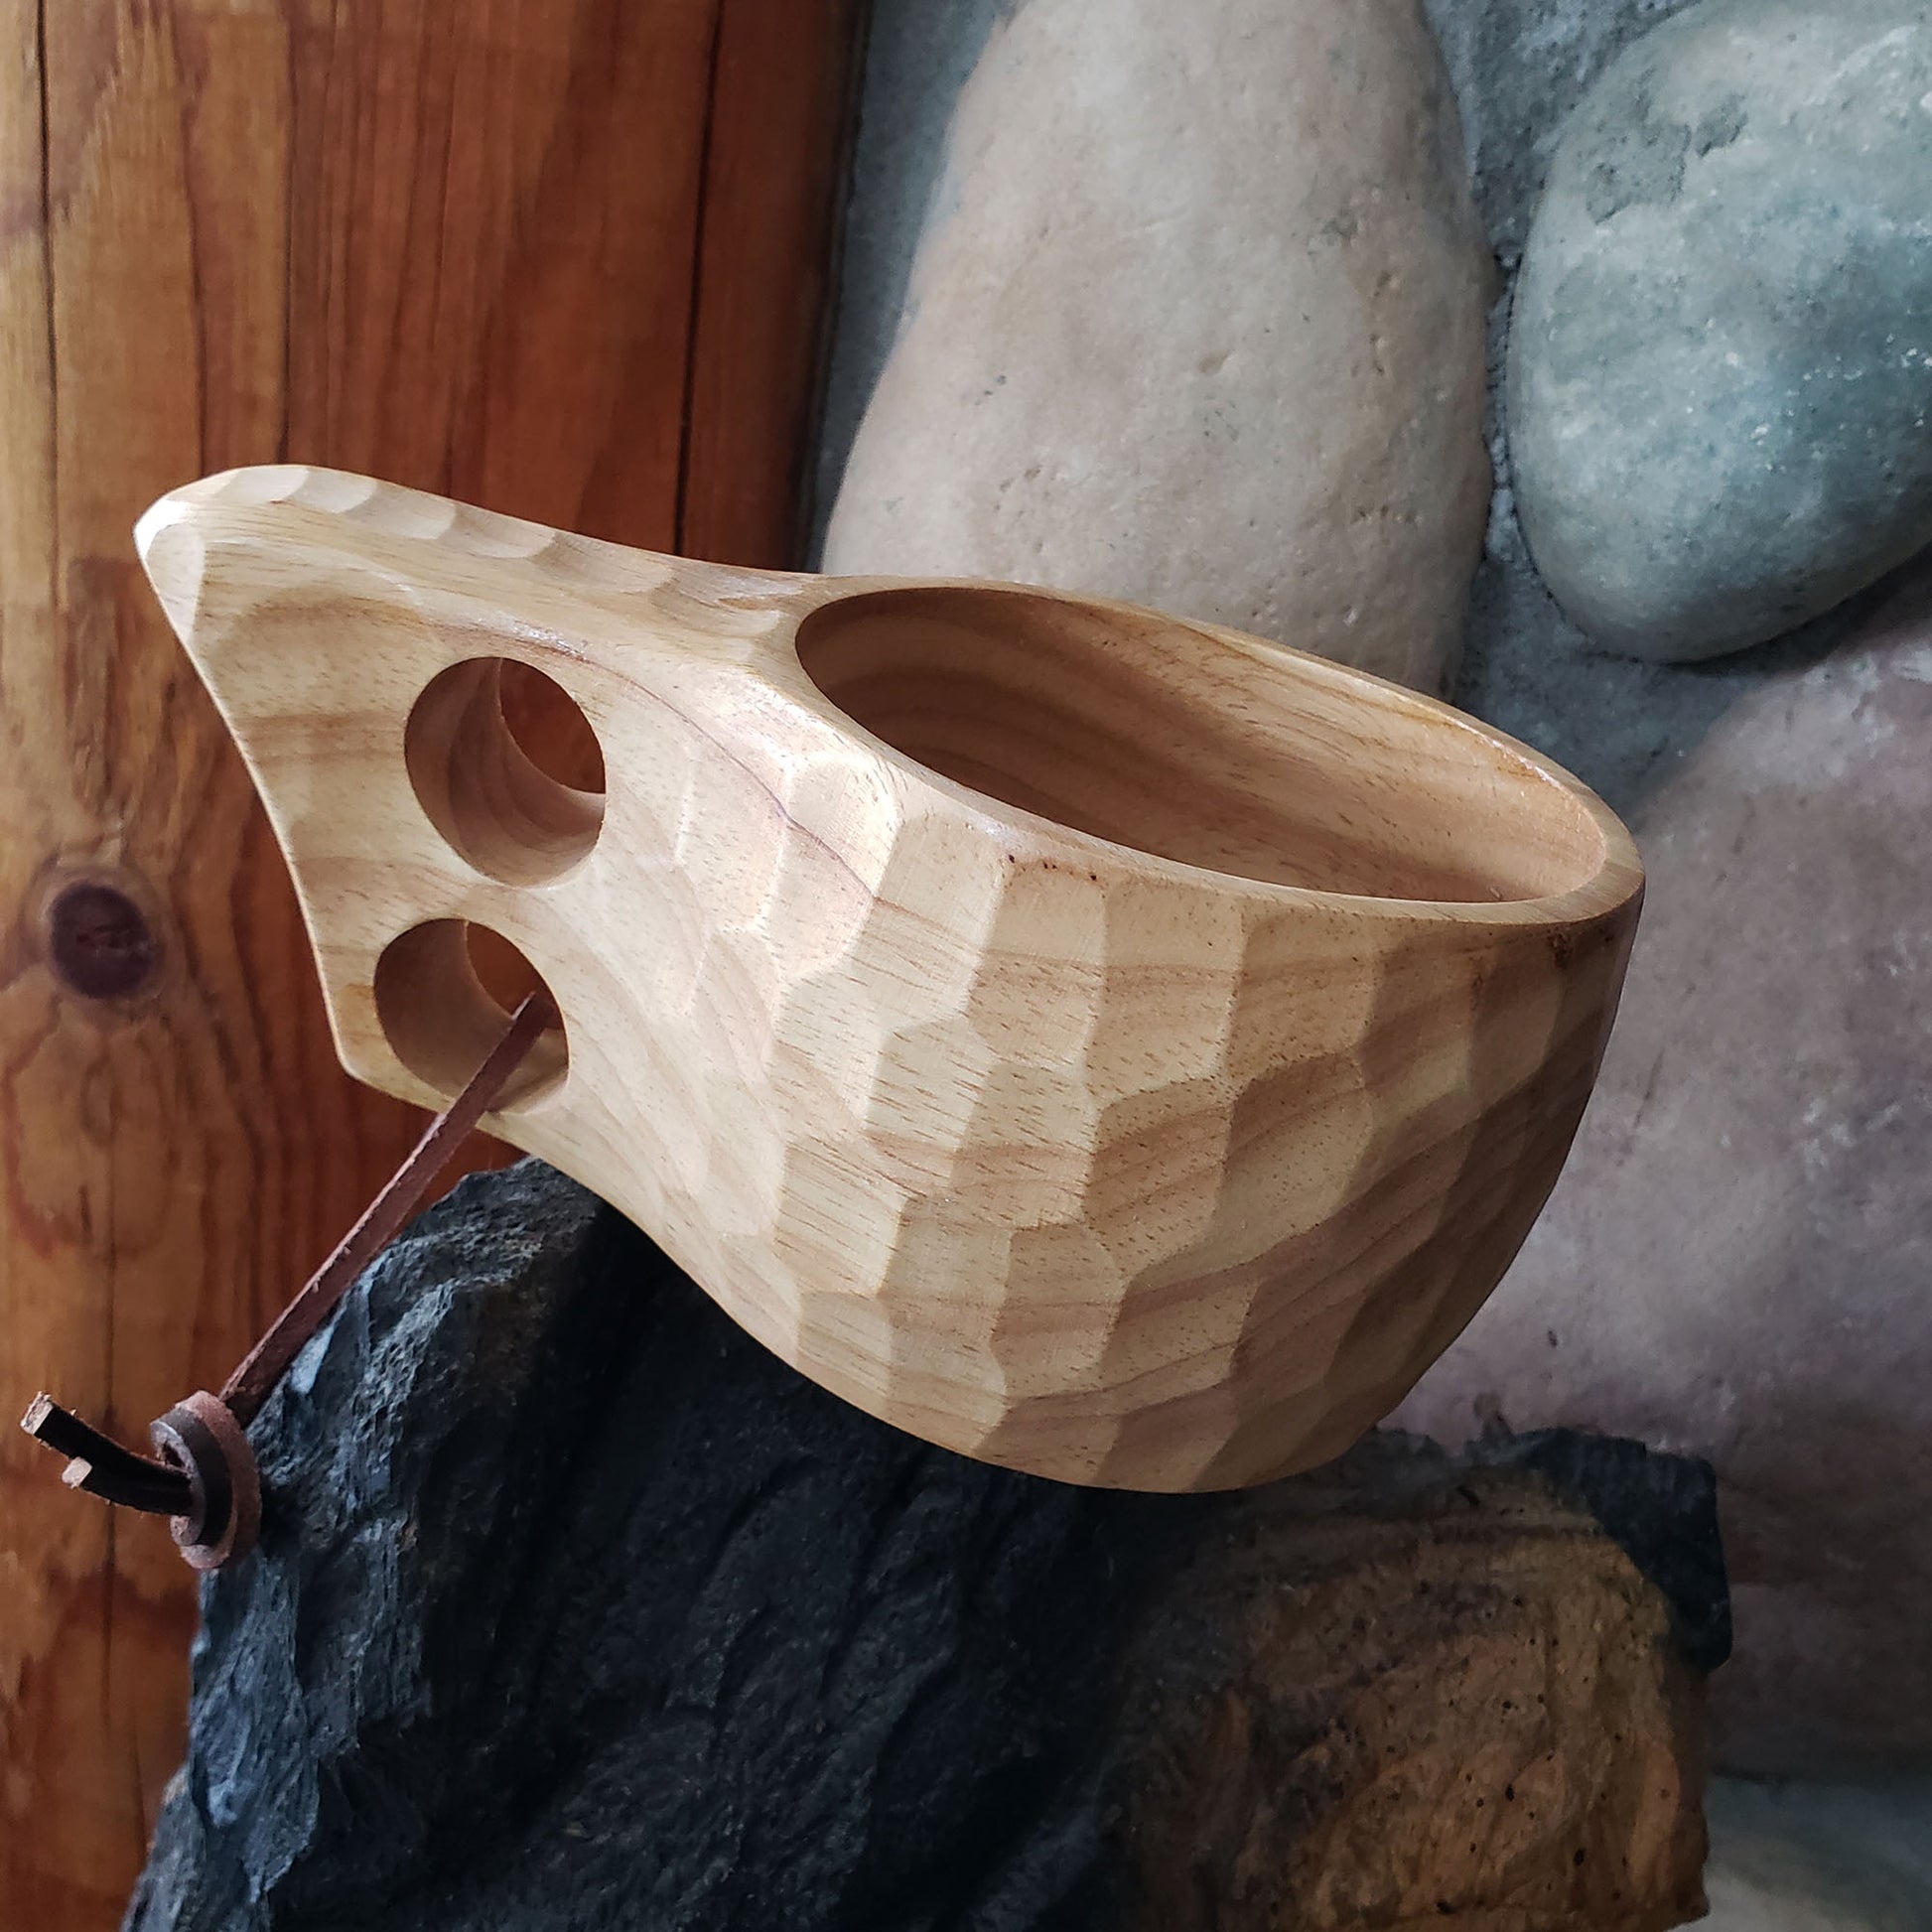 Finnish kuksa - A wooden cup full of tradition